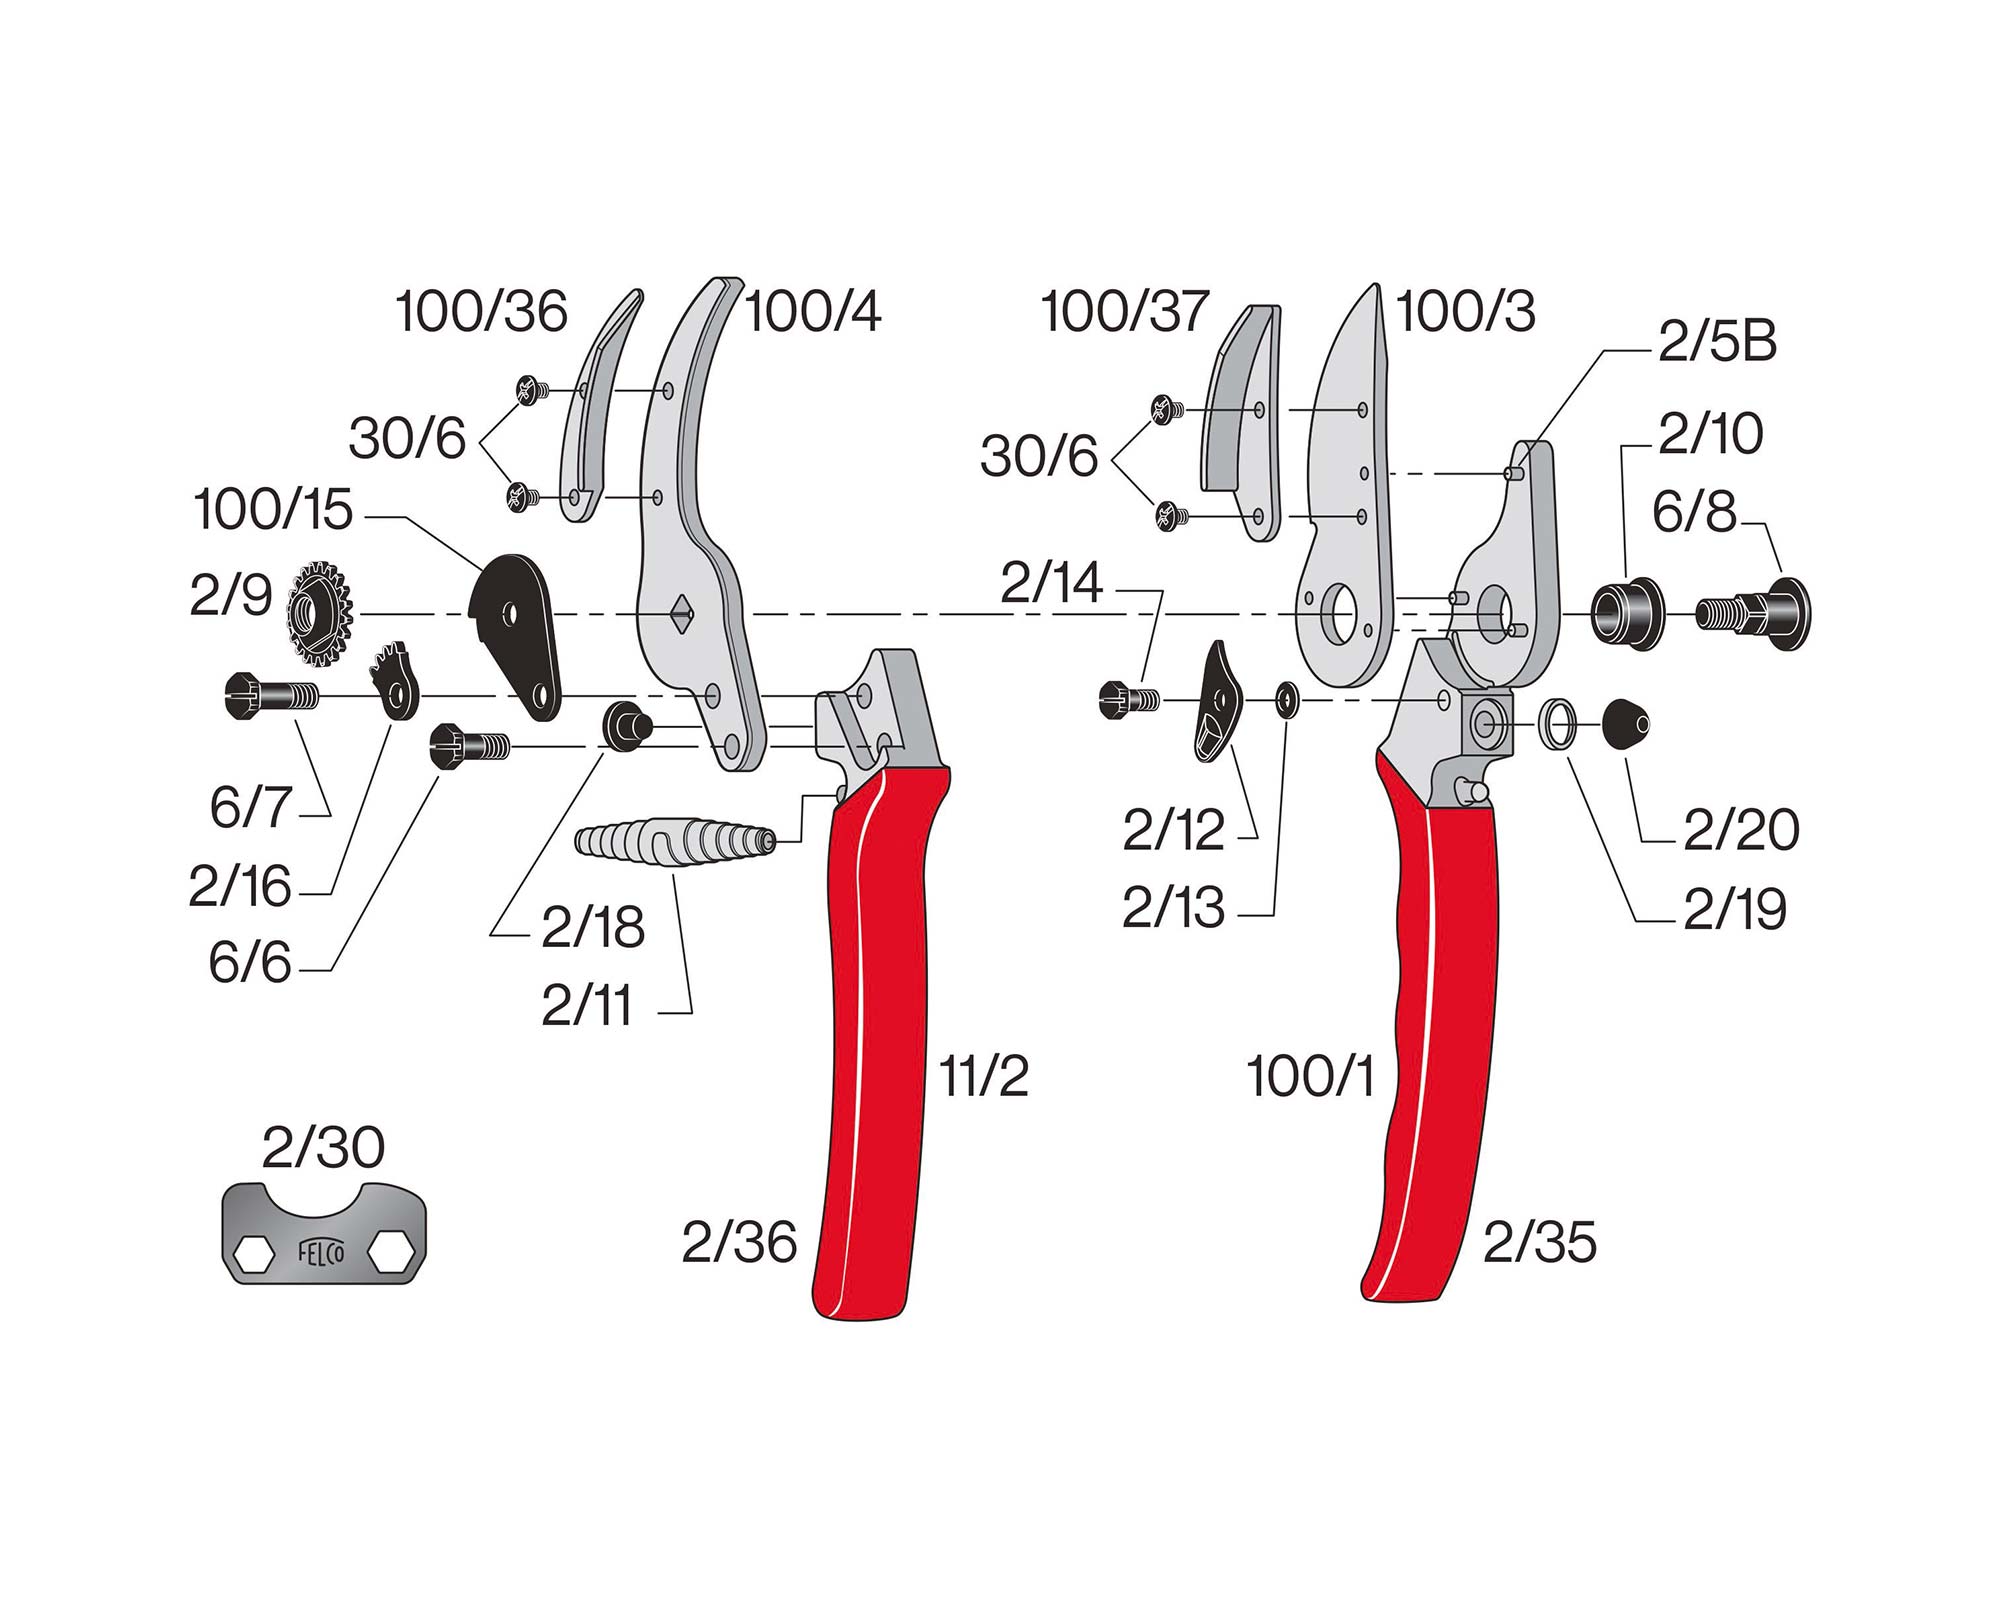 Diagram of parts for Felco100 - showing the part in question, being the 100/3 spare blade